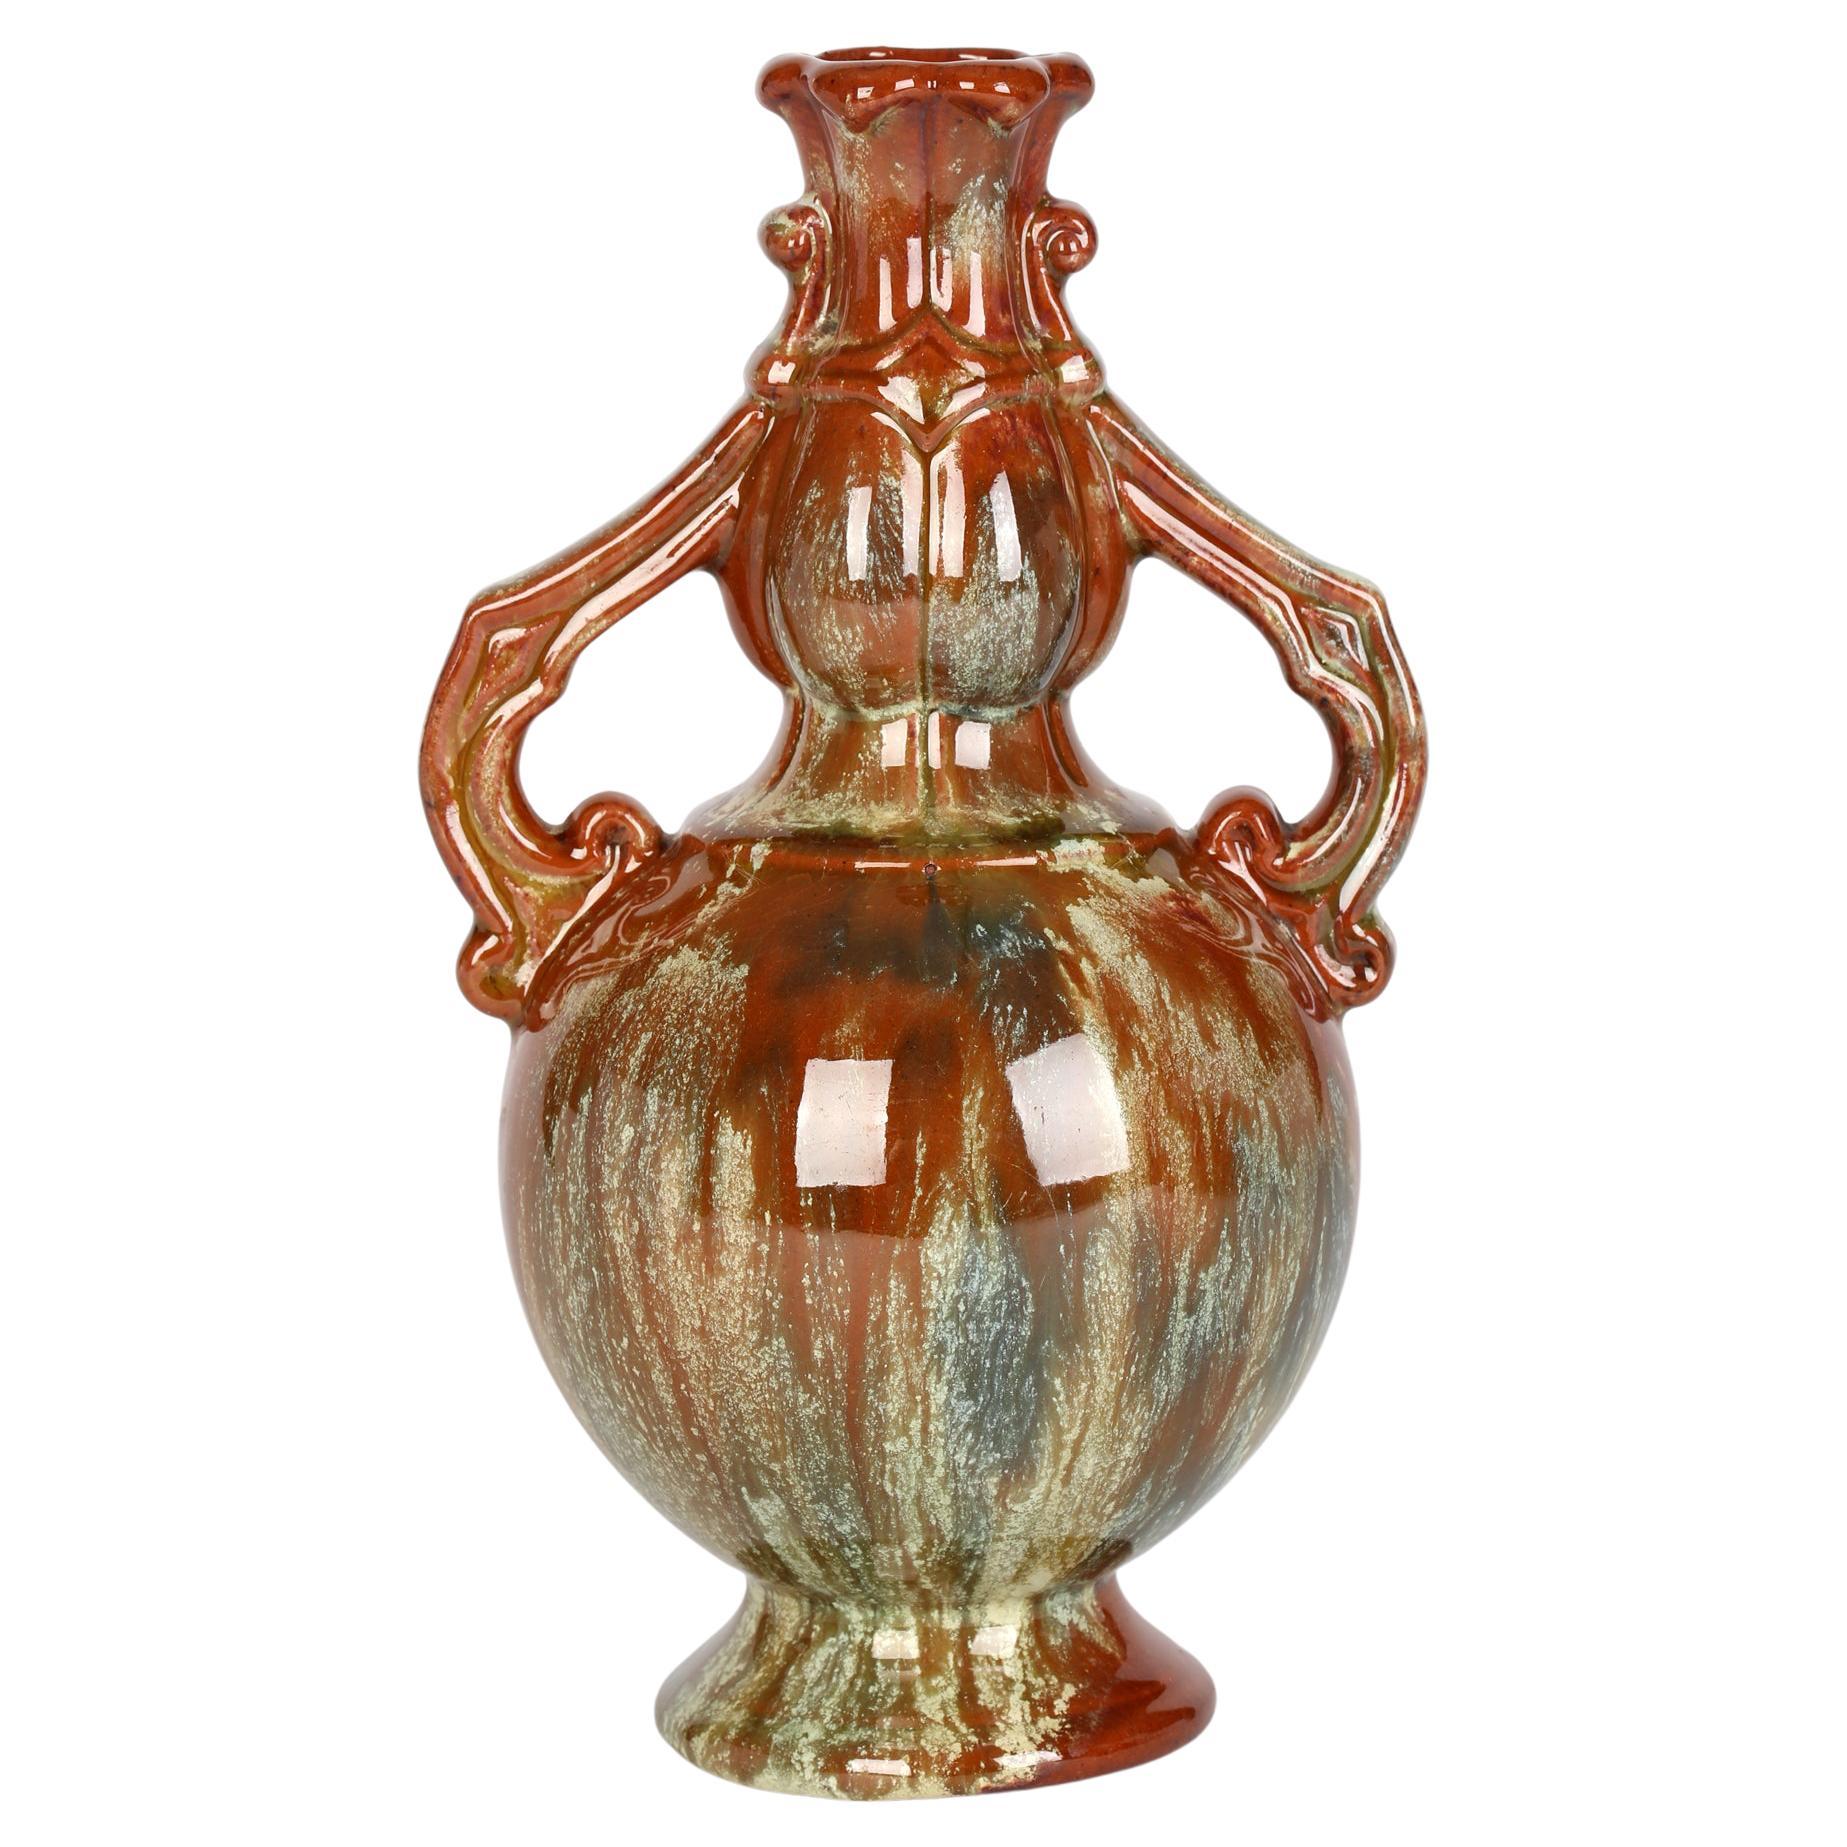 An unusual Aesthetic Movement flow glaze twin handled vase in the ‘Persian Taste’ by renowned British designer Christopher Dresser (British, 1834 – 1904) for Watcombe Torquay and dating from around 1885. The red earthenware vase is lightly potted